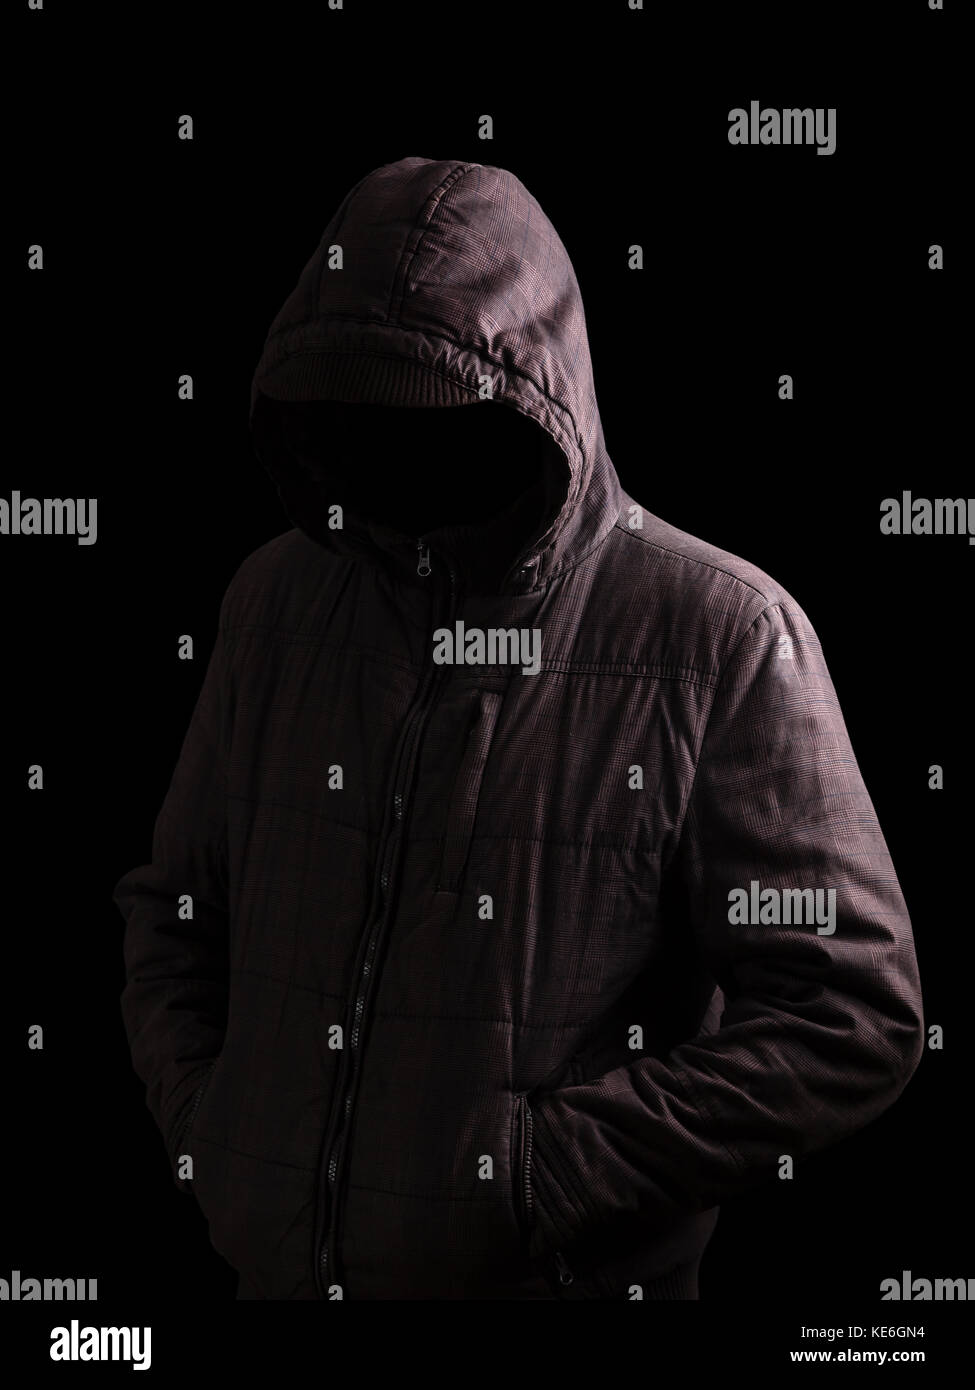 Scary and creepy man hiding in the shadows, standing in the darkness / black background hood hiding face shadows dangerous mysterious stalker hood Stock Photo